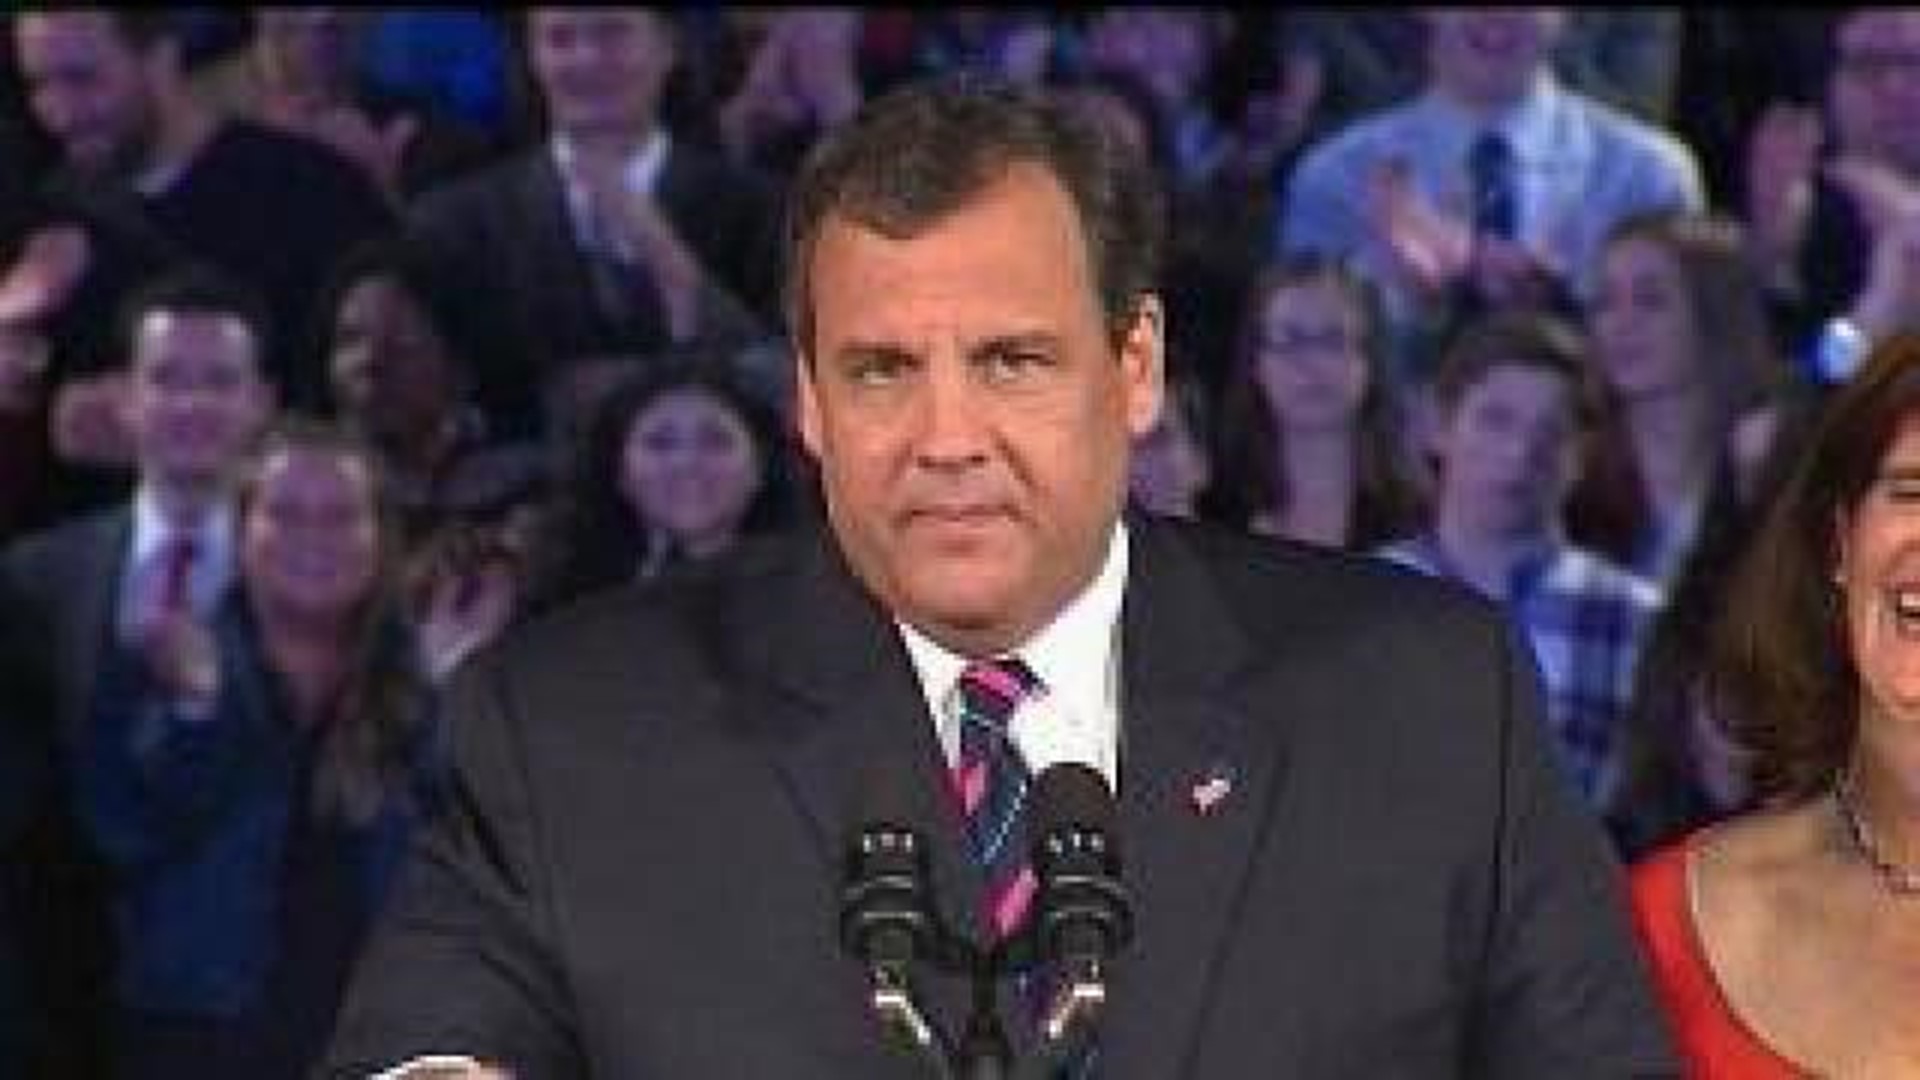 Chris Christie reelected